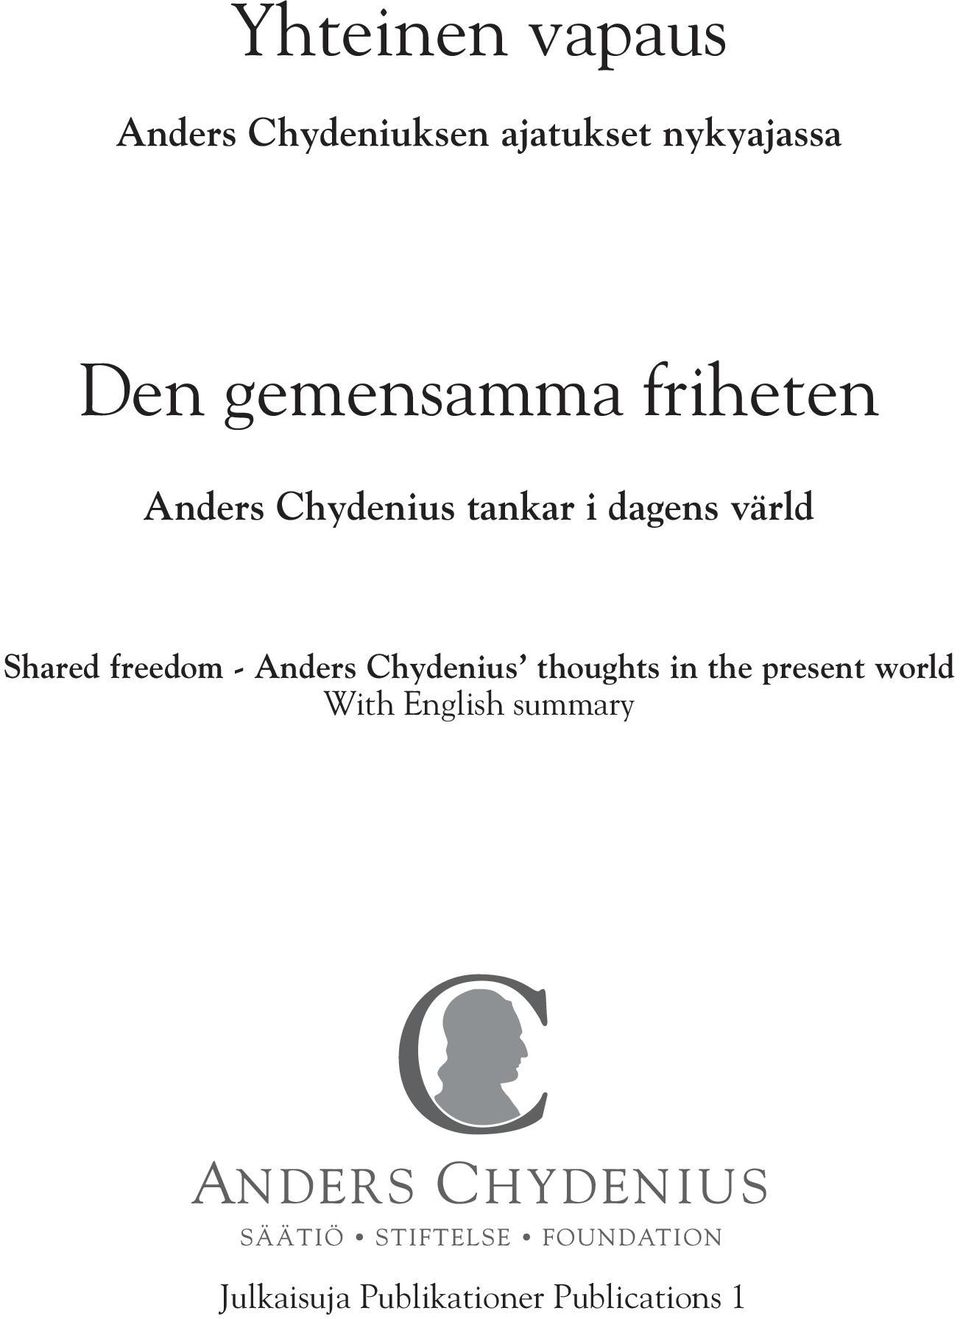 Shared freedom - Anders Chydenius thoughts in the present